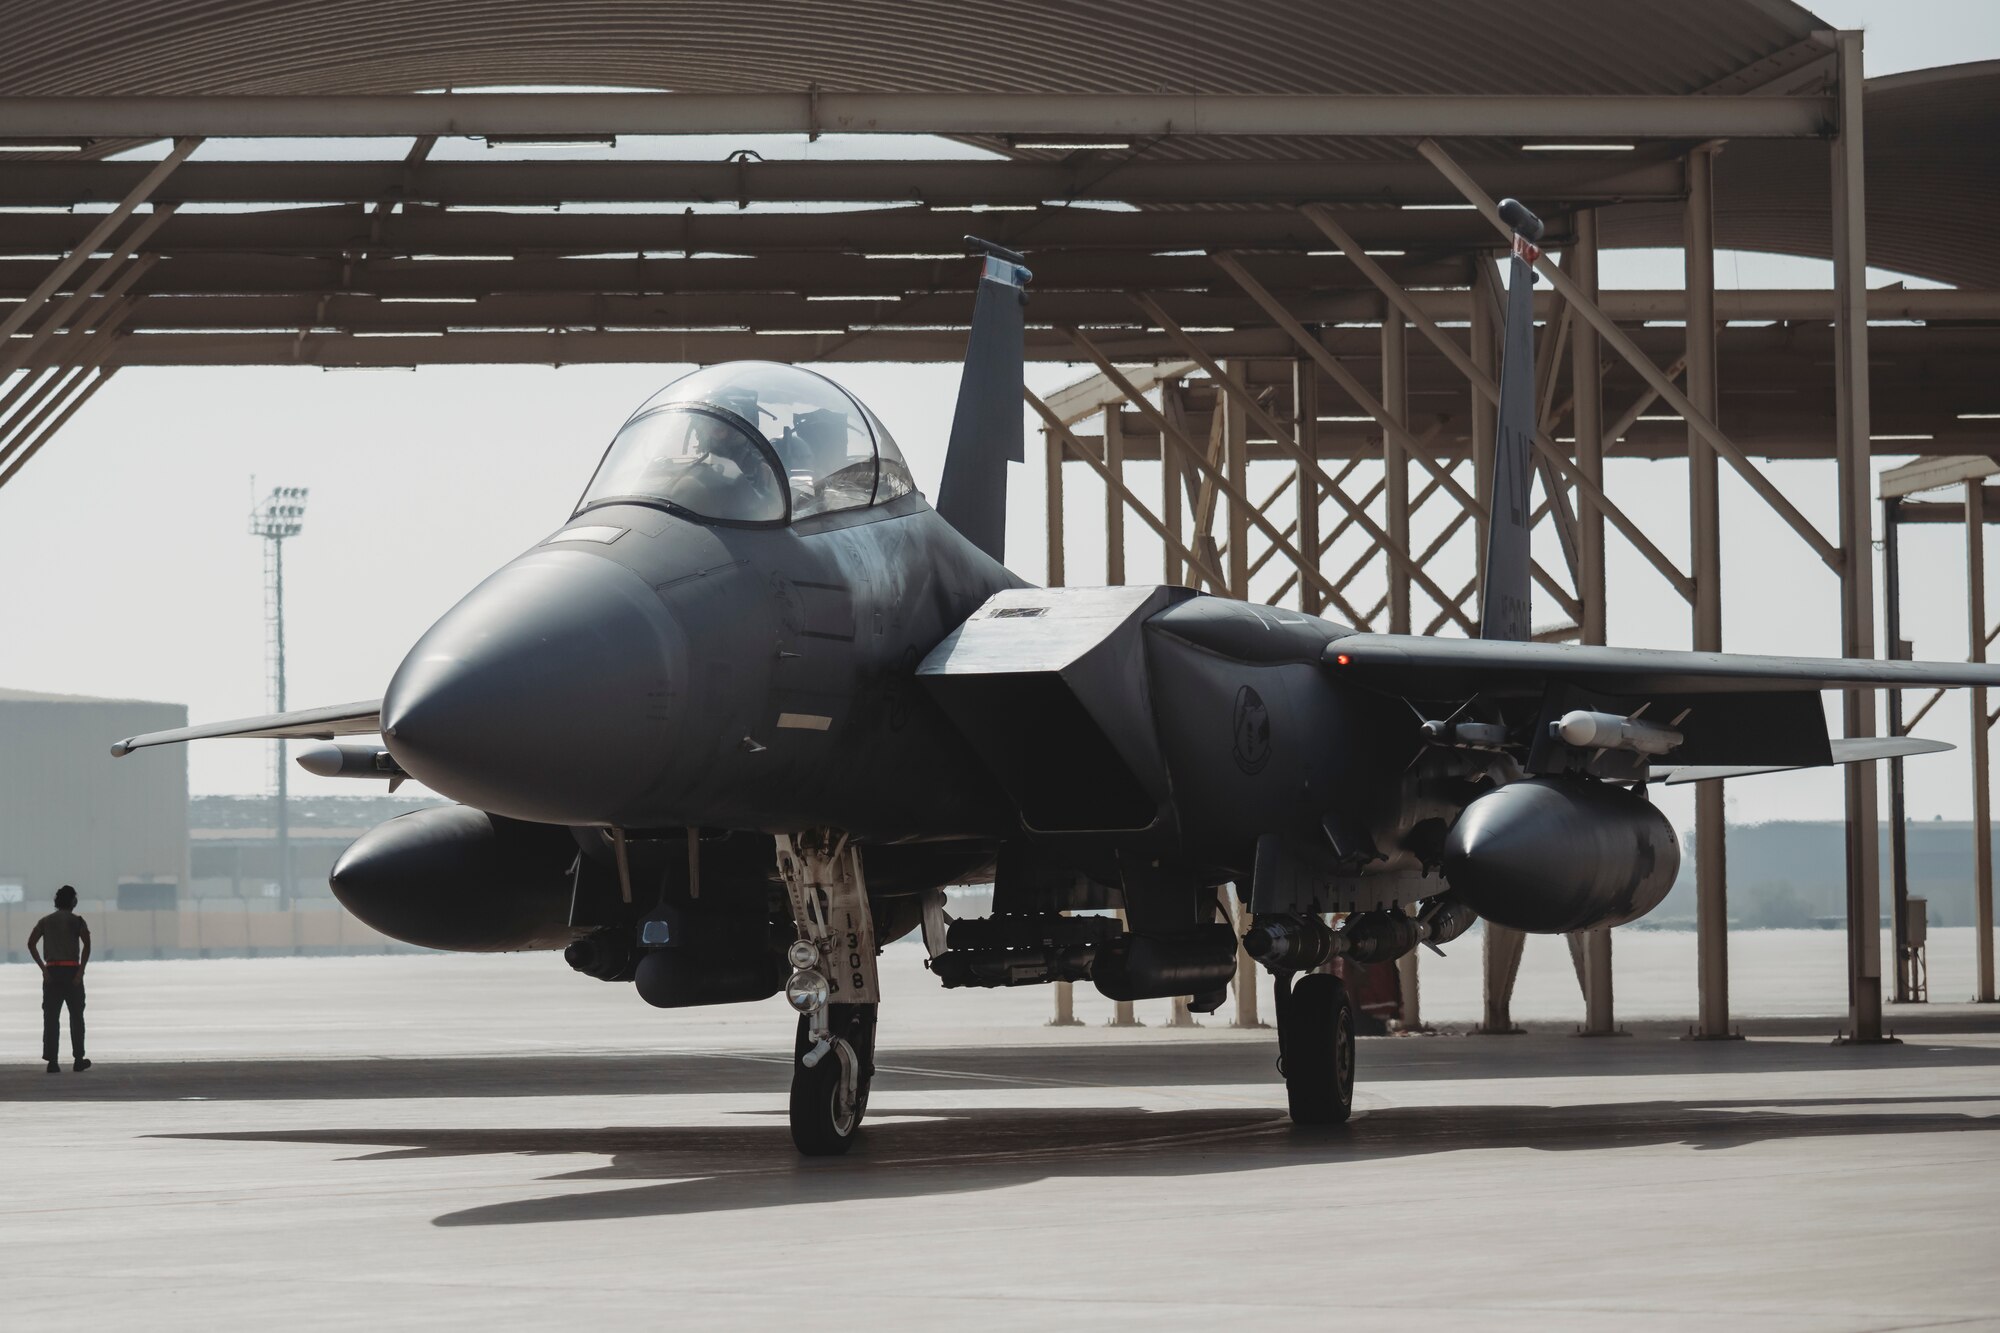 U.S. Air Force Capt. Miranda Bray, 494th Expeditionary Fighter Squadron, F-15E Strike Eagle fighter pilot,  deployed to Al Dhafra Air Base as part of an agile combat employment, a form of operations that increases the pace and frequency of missions while maximizing efficiencies.